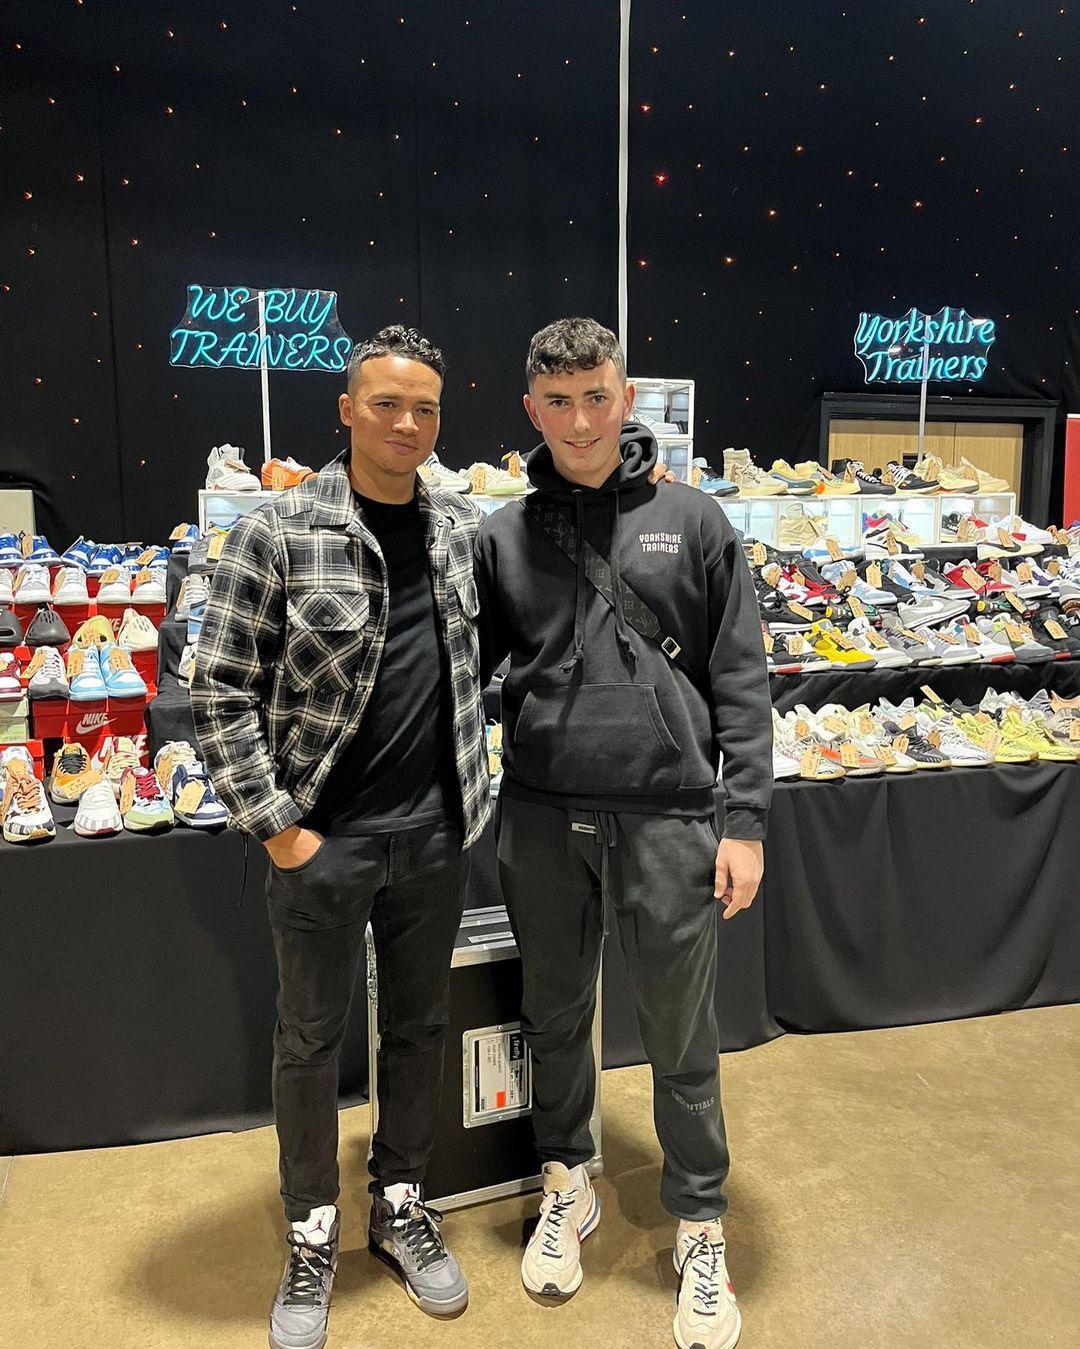 Jermaine Jenas with Yorkshire Trainers